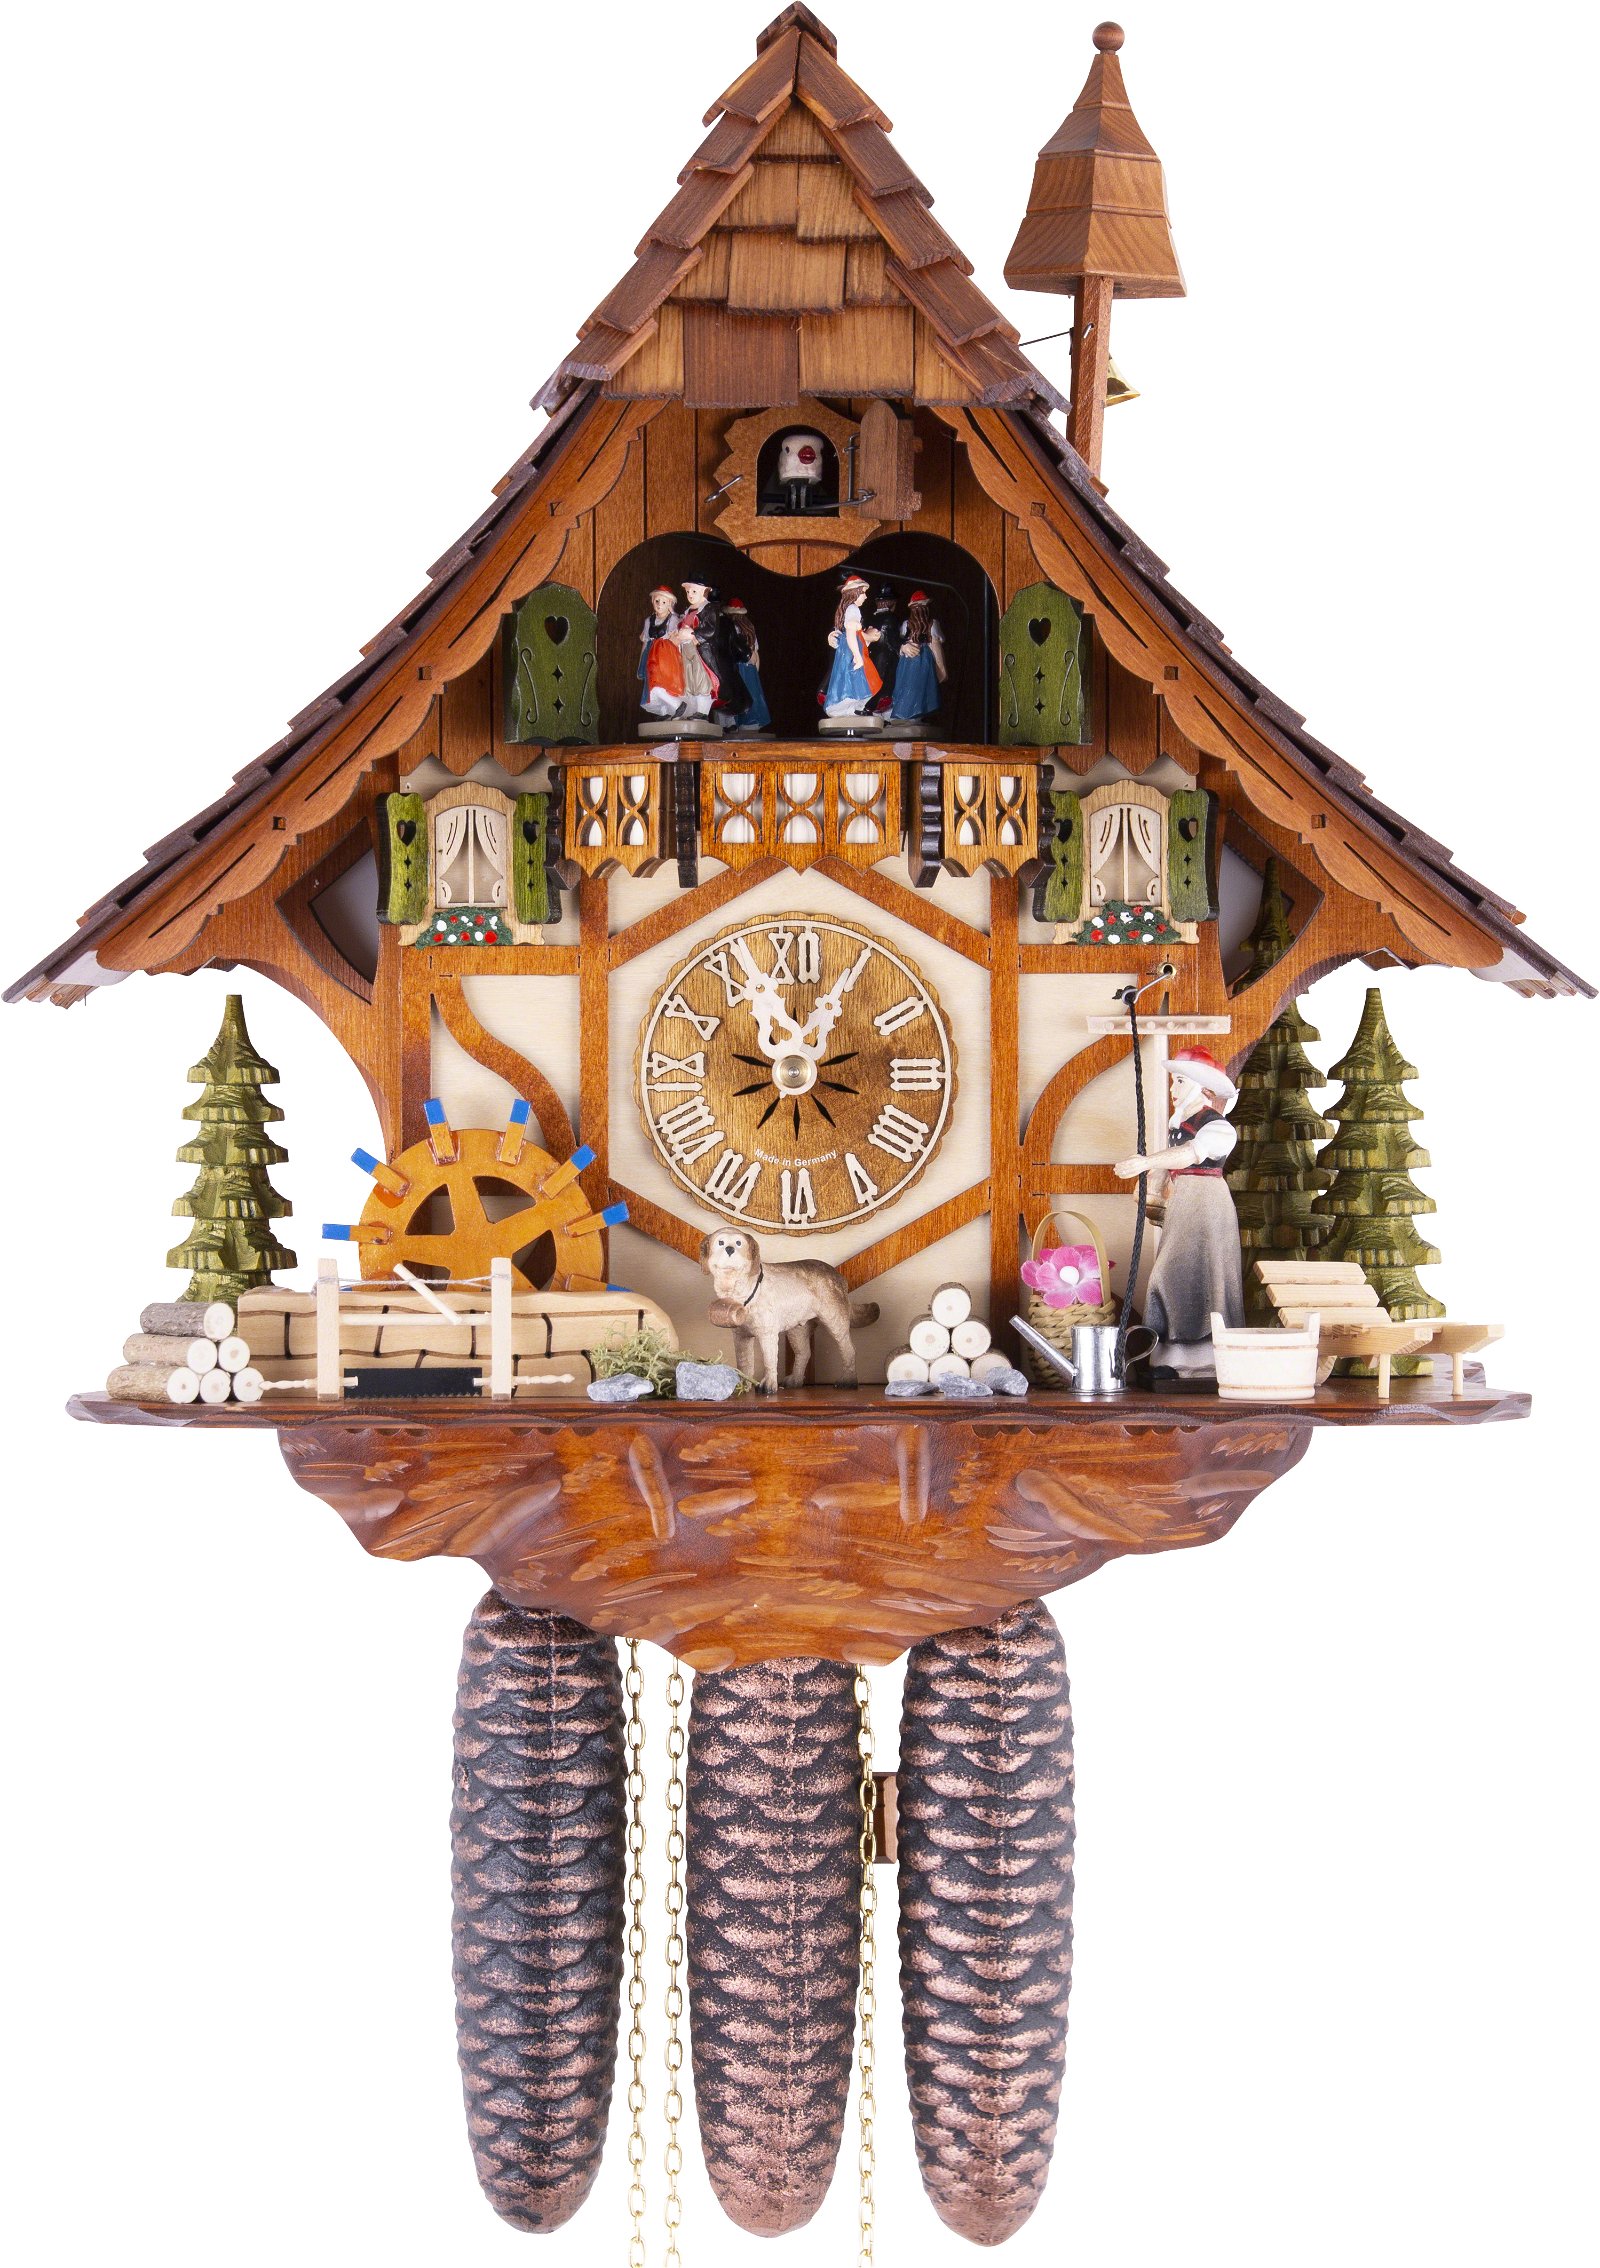 Cuckoo Clock 8-day-movement Chalet-Style 40cm by Hekas